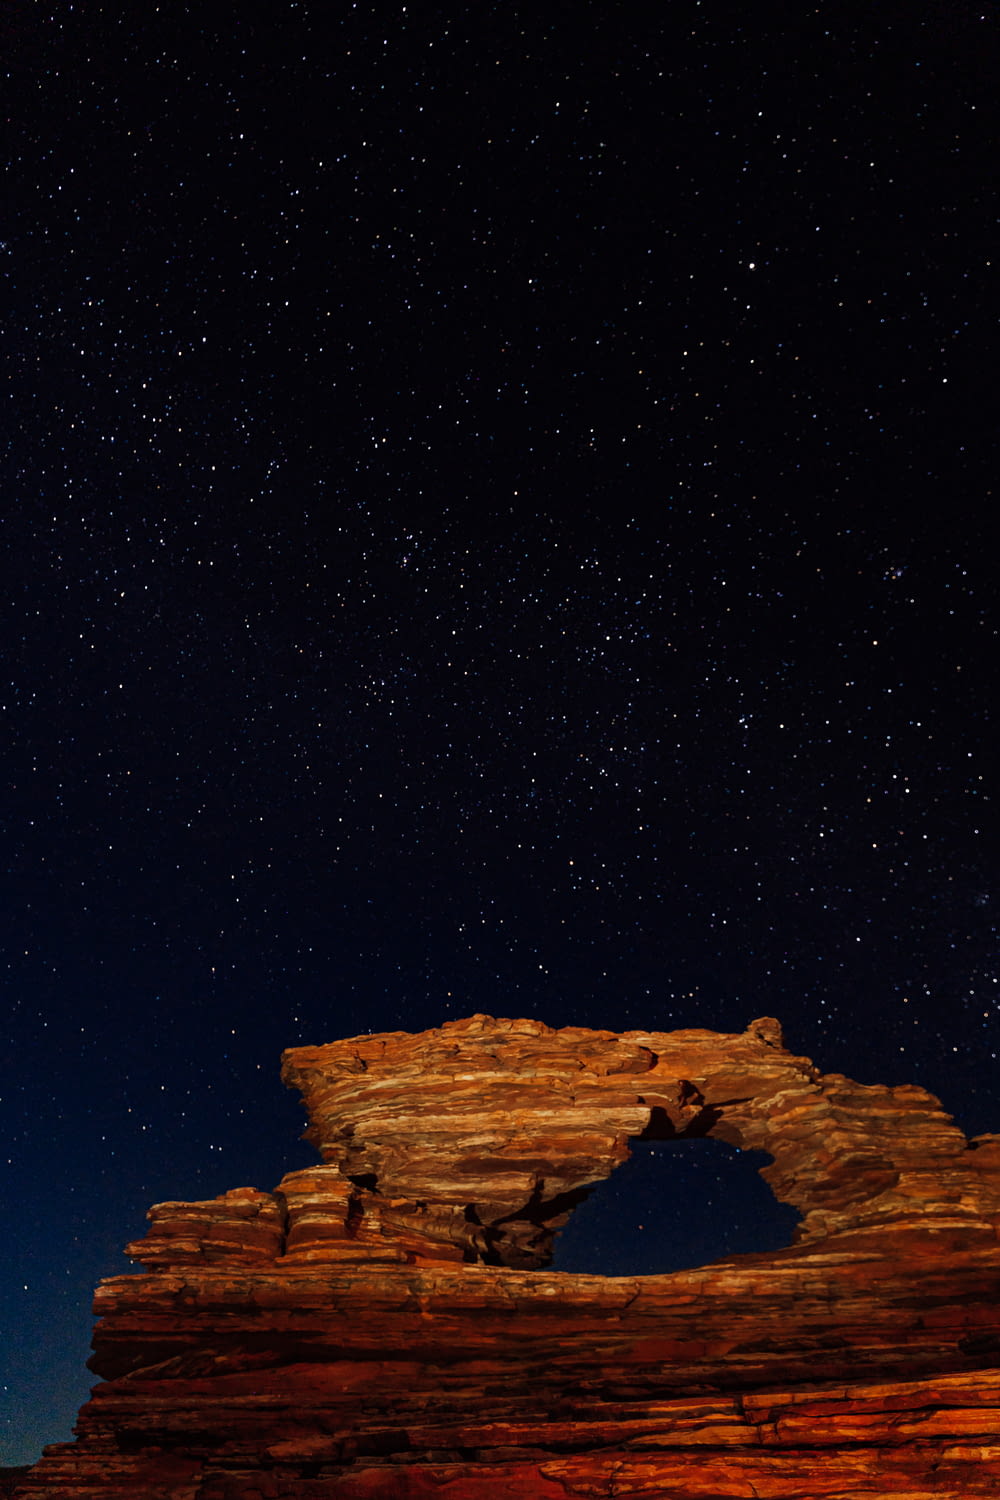 a rock formation under a night sky filled with stars